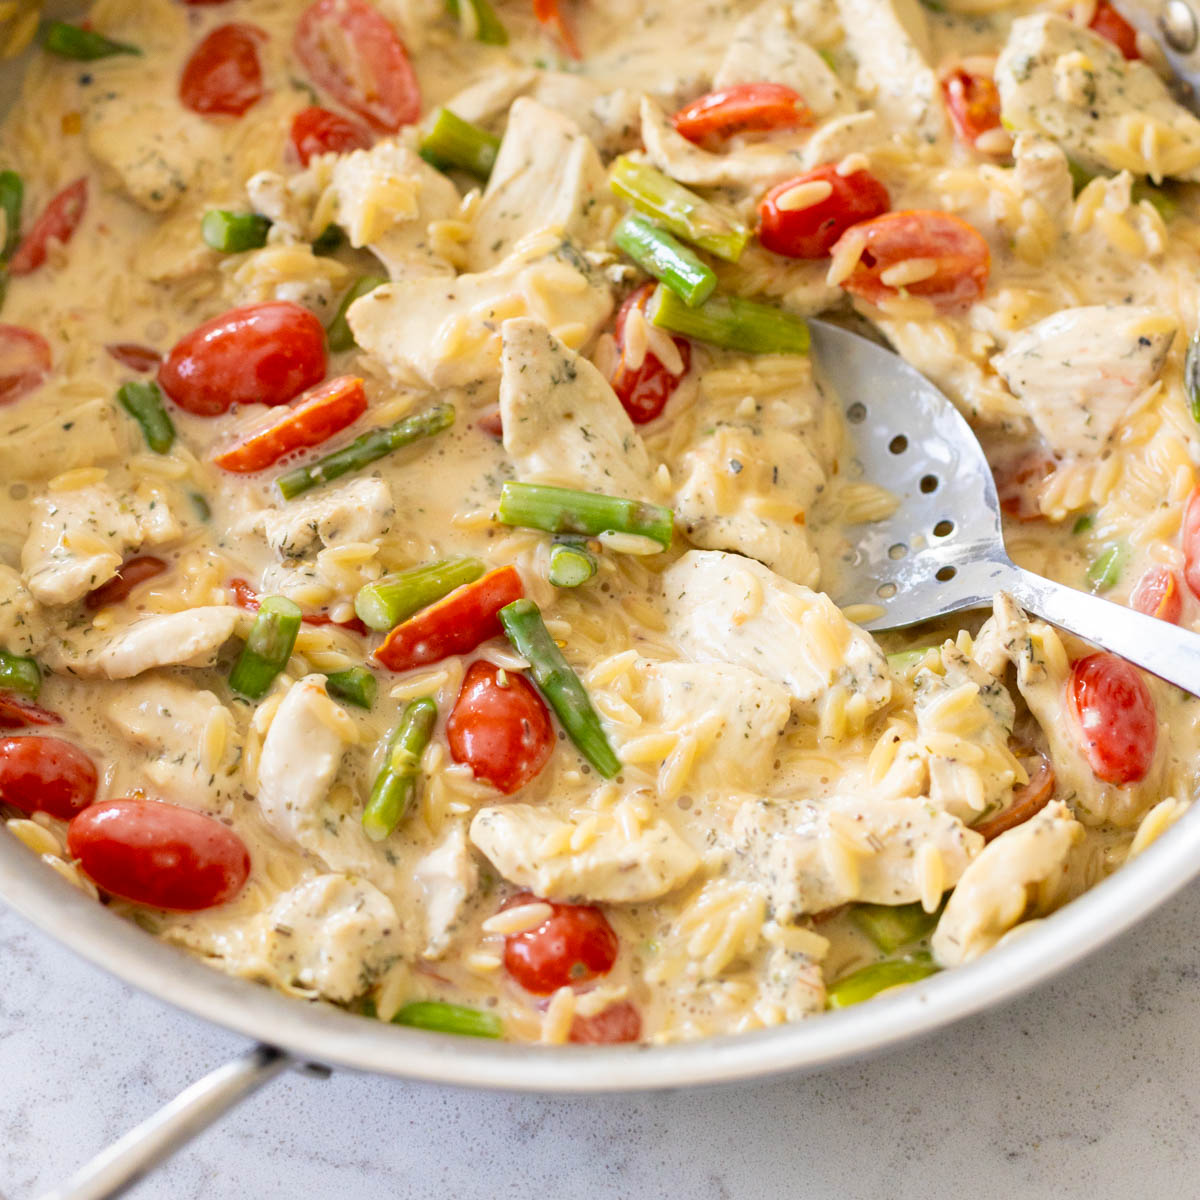 A skillet is filled with creamy orzo with chicken chunks, asparagus spears, and cherry tomatoes.